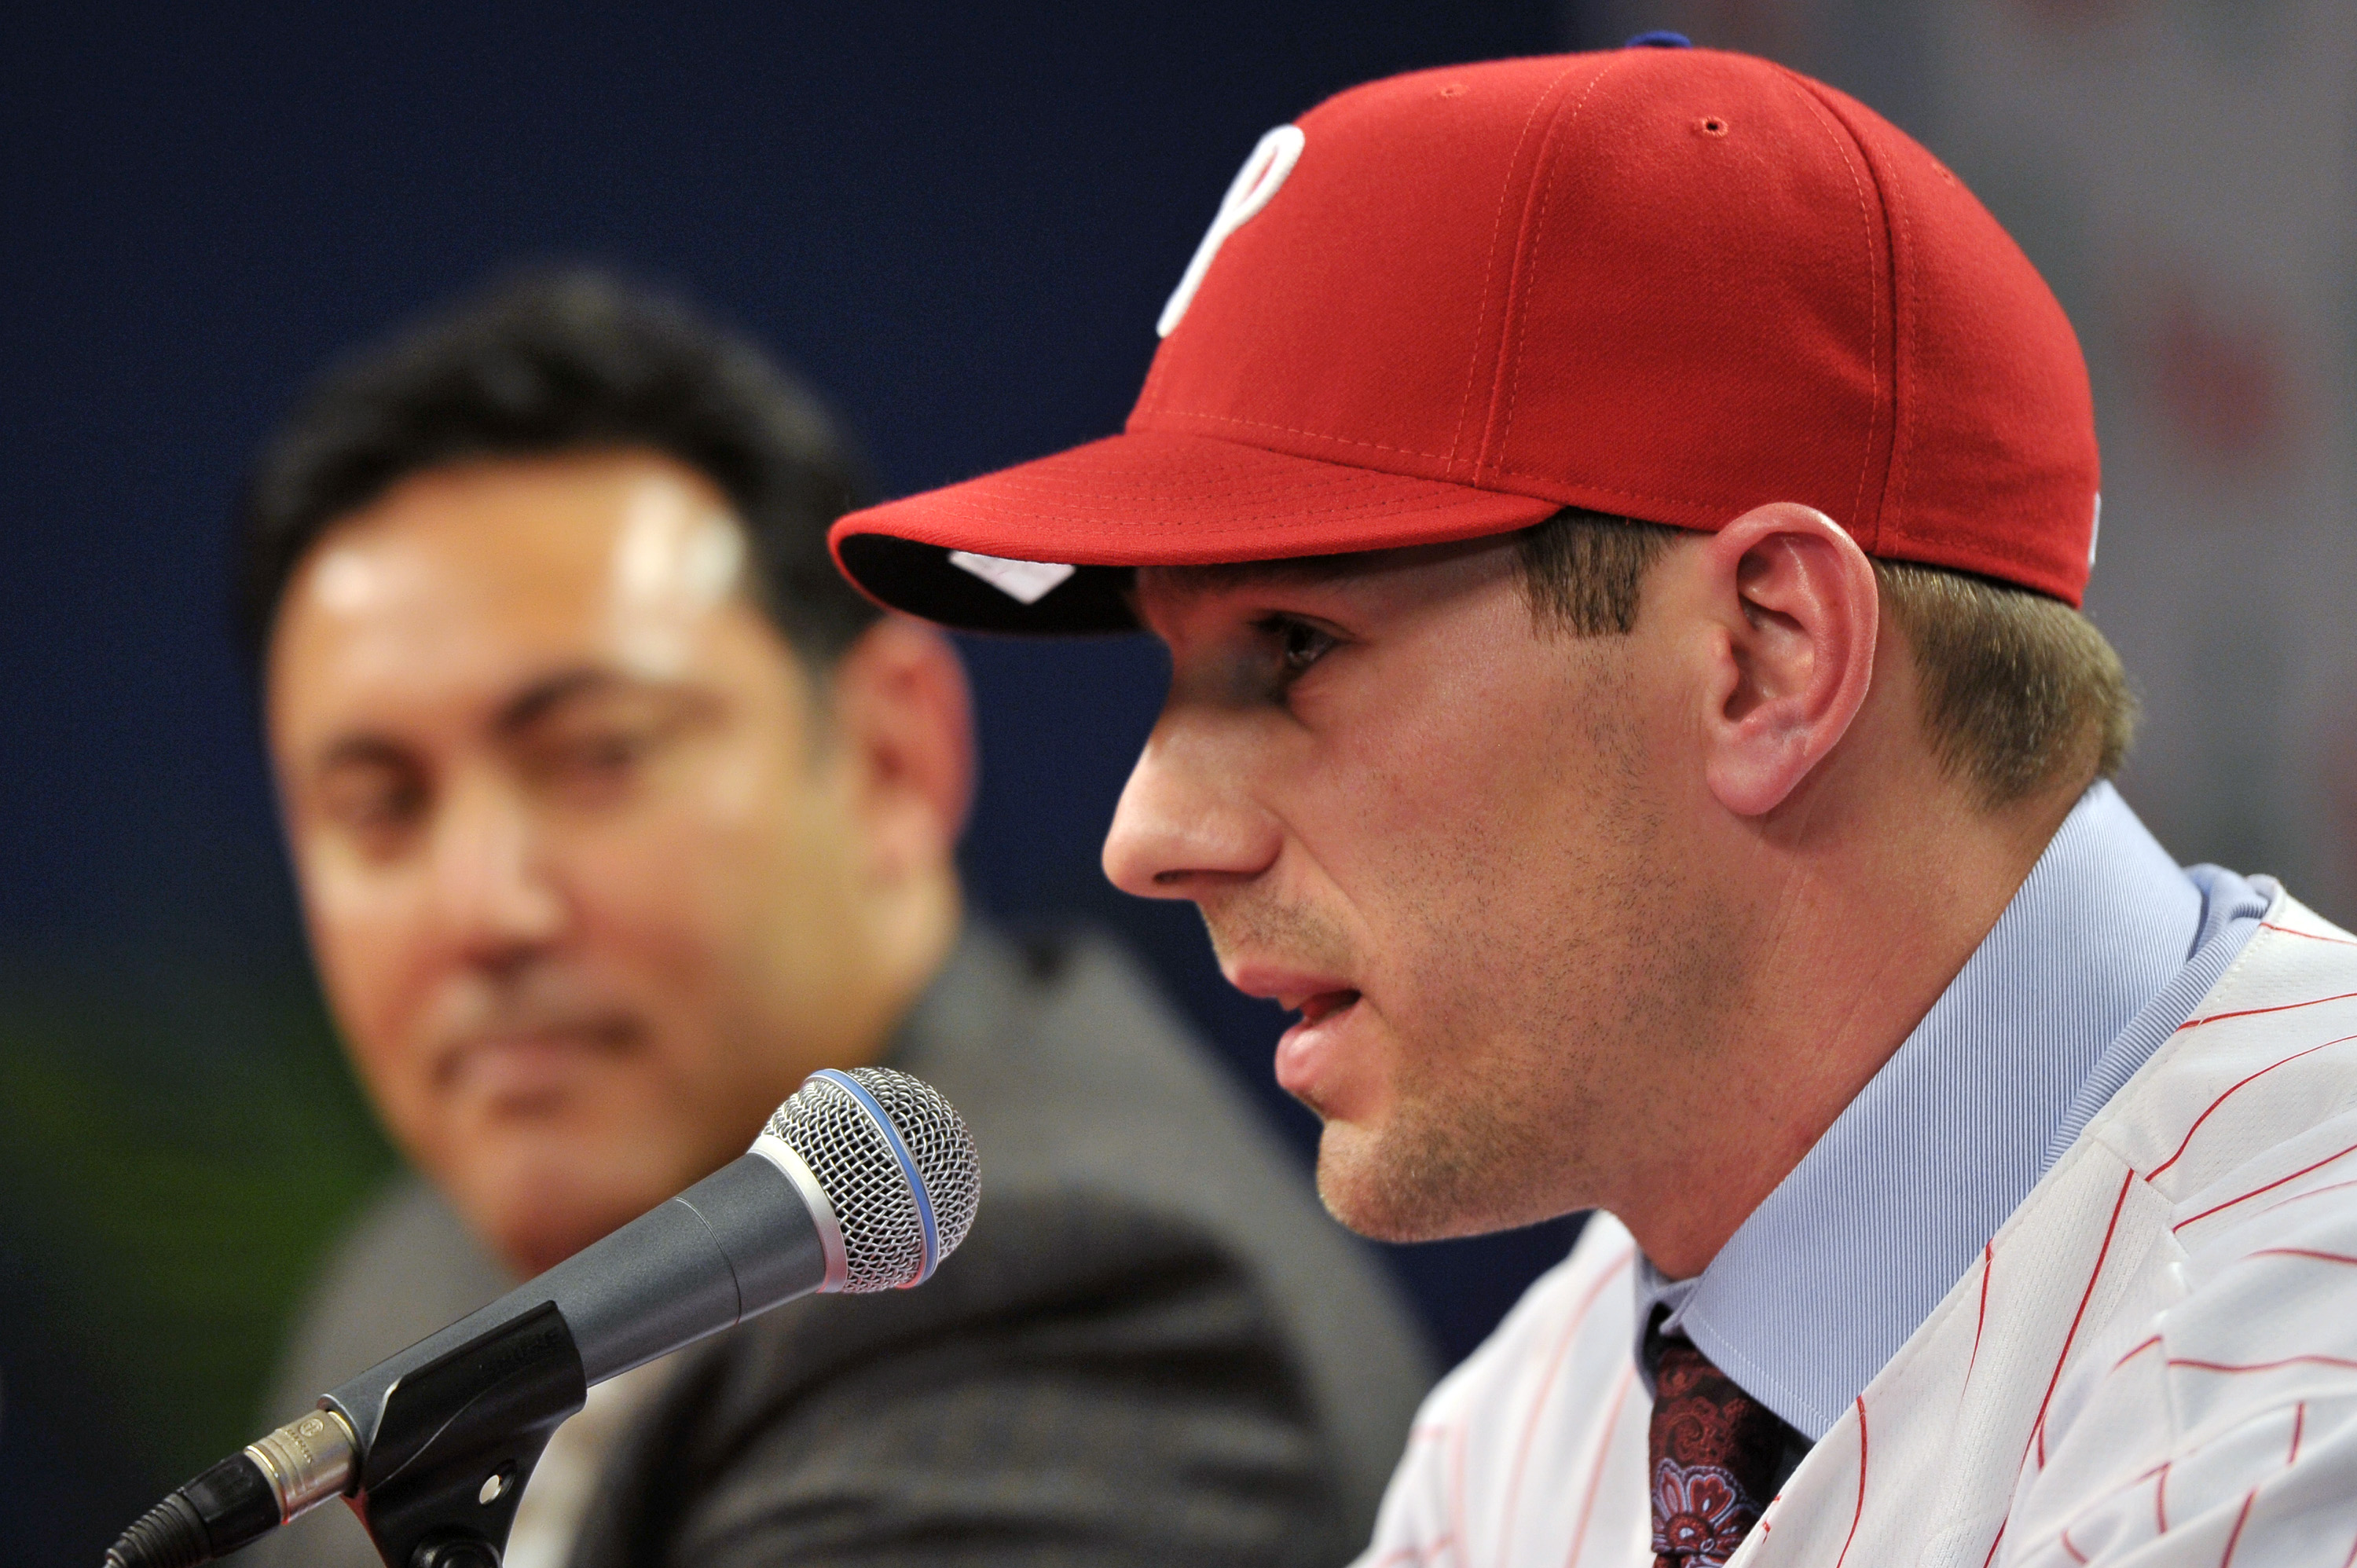 PHILADELPHIA - DECEMBER 15: Pitcher Cliff Lee #33 of the Philadelphia Phillies talks with the media while general manager Ruben Amaro Jr. watches during a press conference at Citizens Bank Park on December 15, 2010 in Philadelphia, Pennsylvania. (Photo by